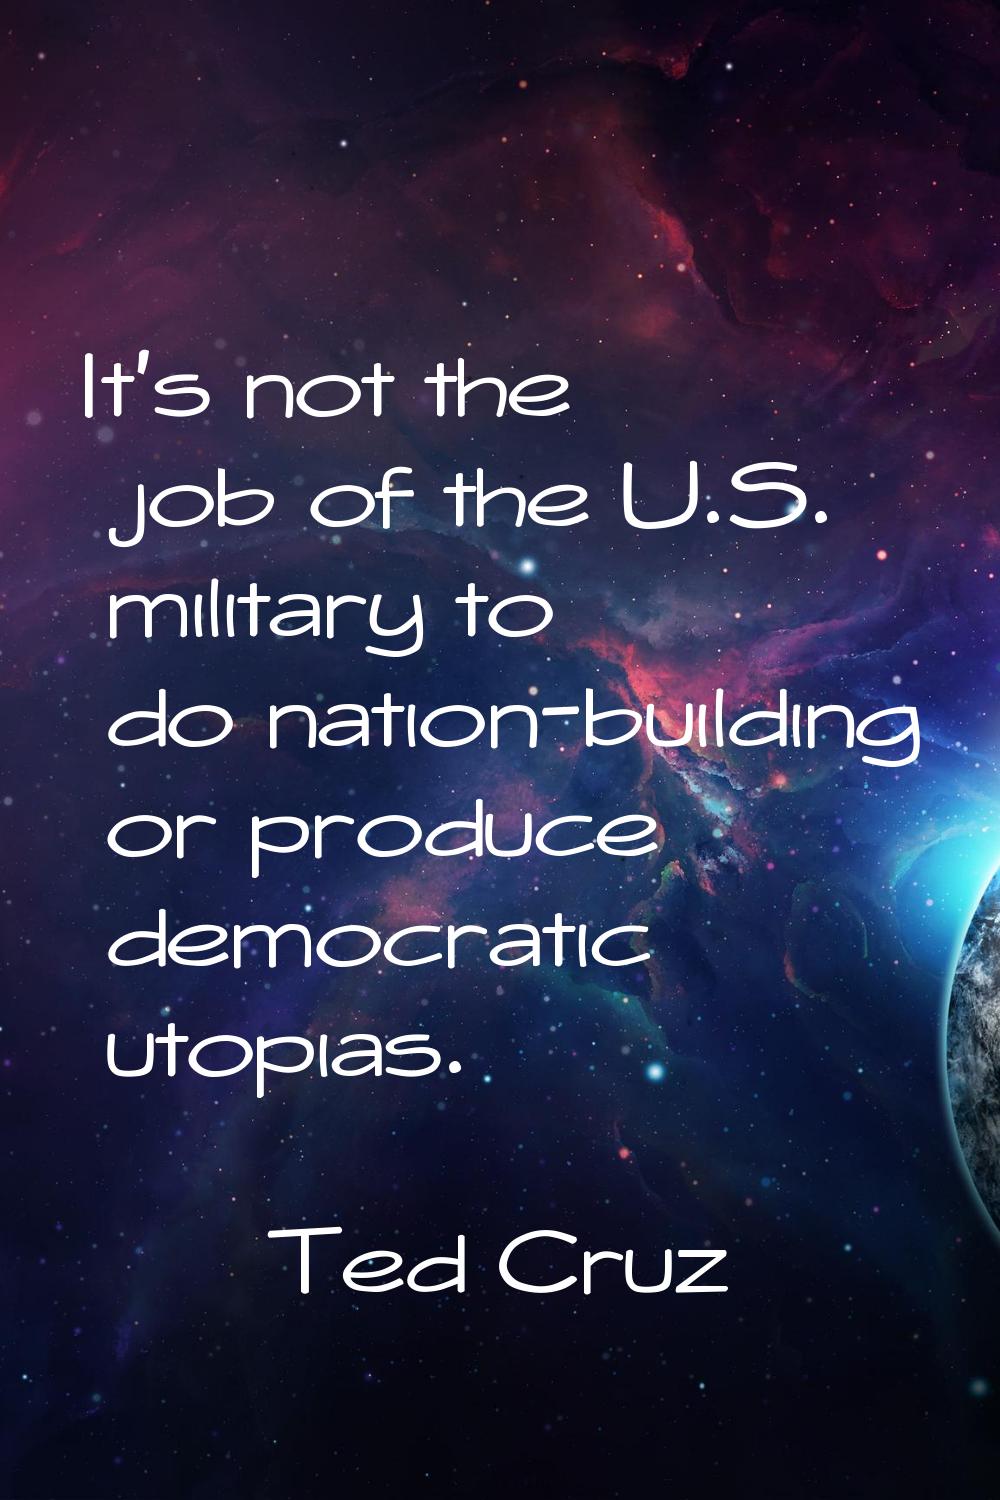 It's not the job of the U.S. military to do nation-building or produce democratic utopias.